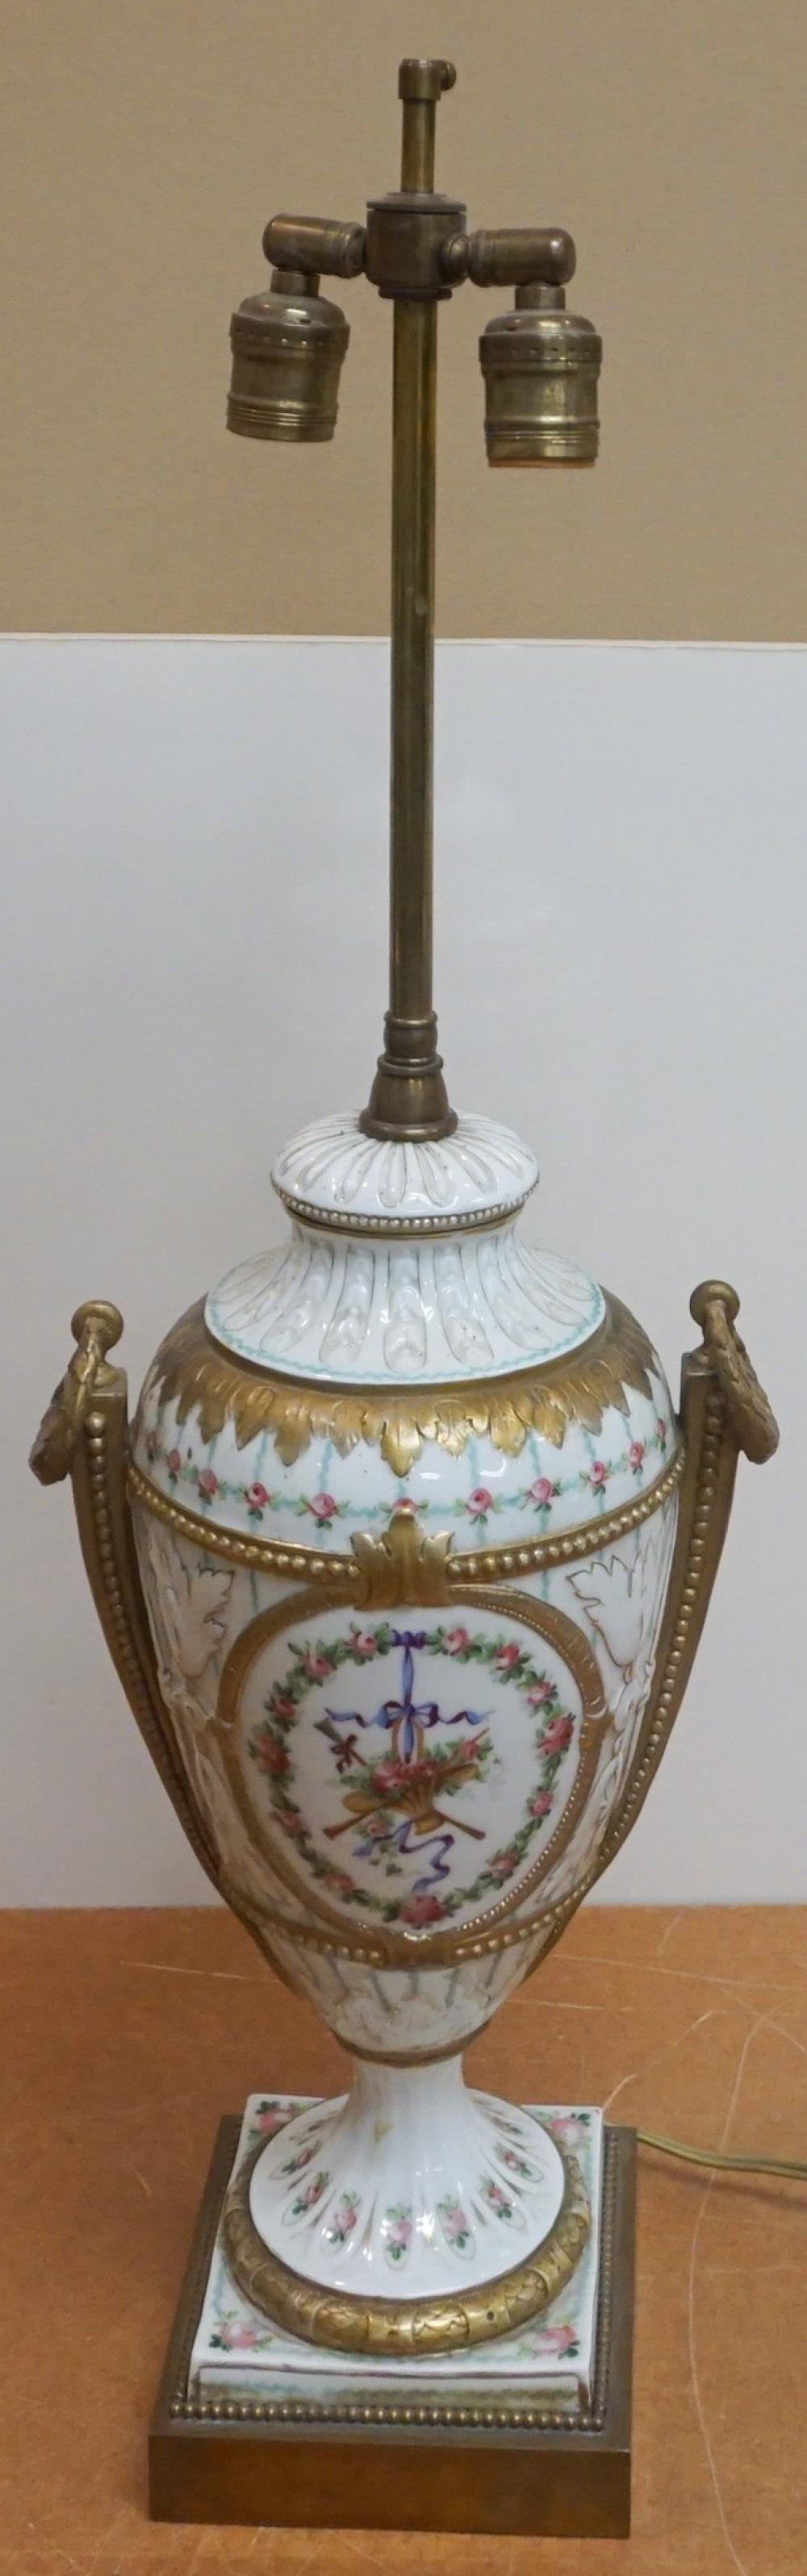 SEVRES-TYPE BRASS MOUNTED FLORAL